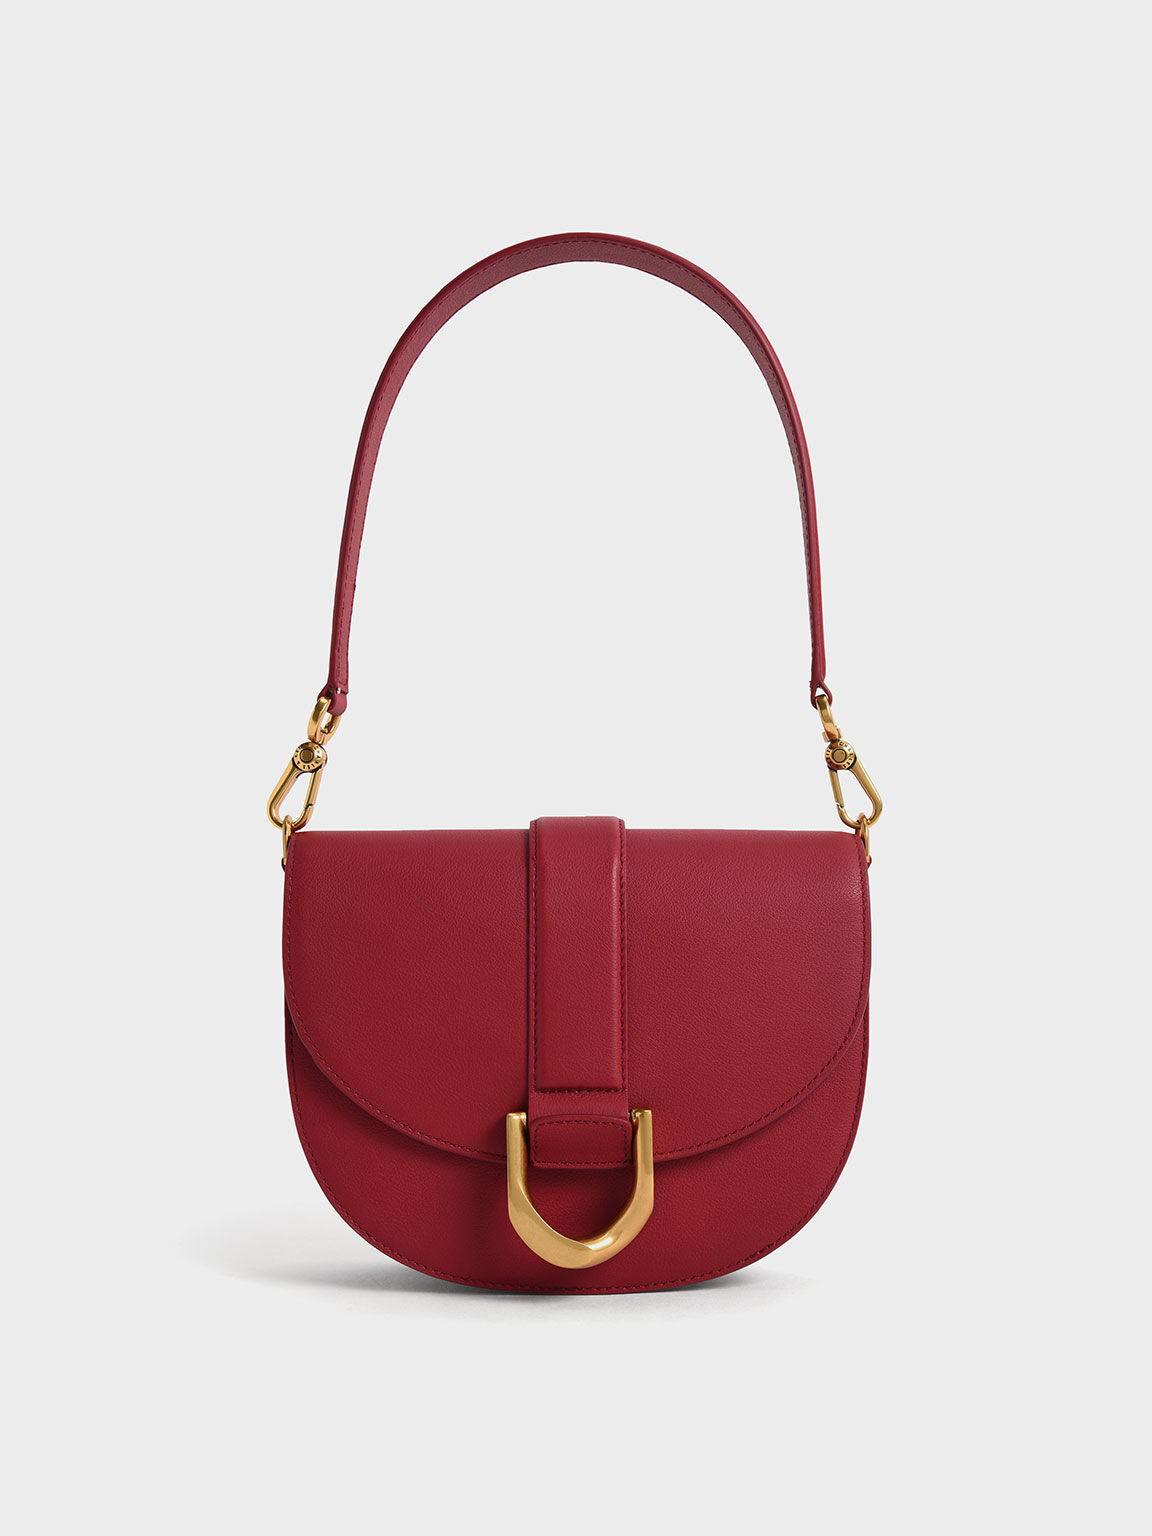 Lunar New Year Collection: Gabine Leather Saddle Bag, Red, hi-res